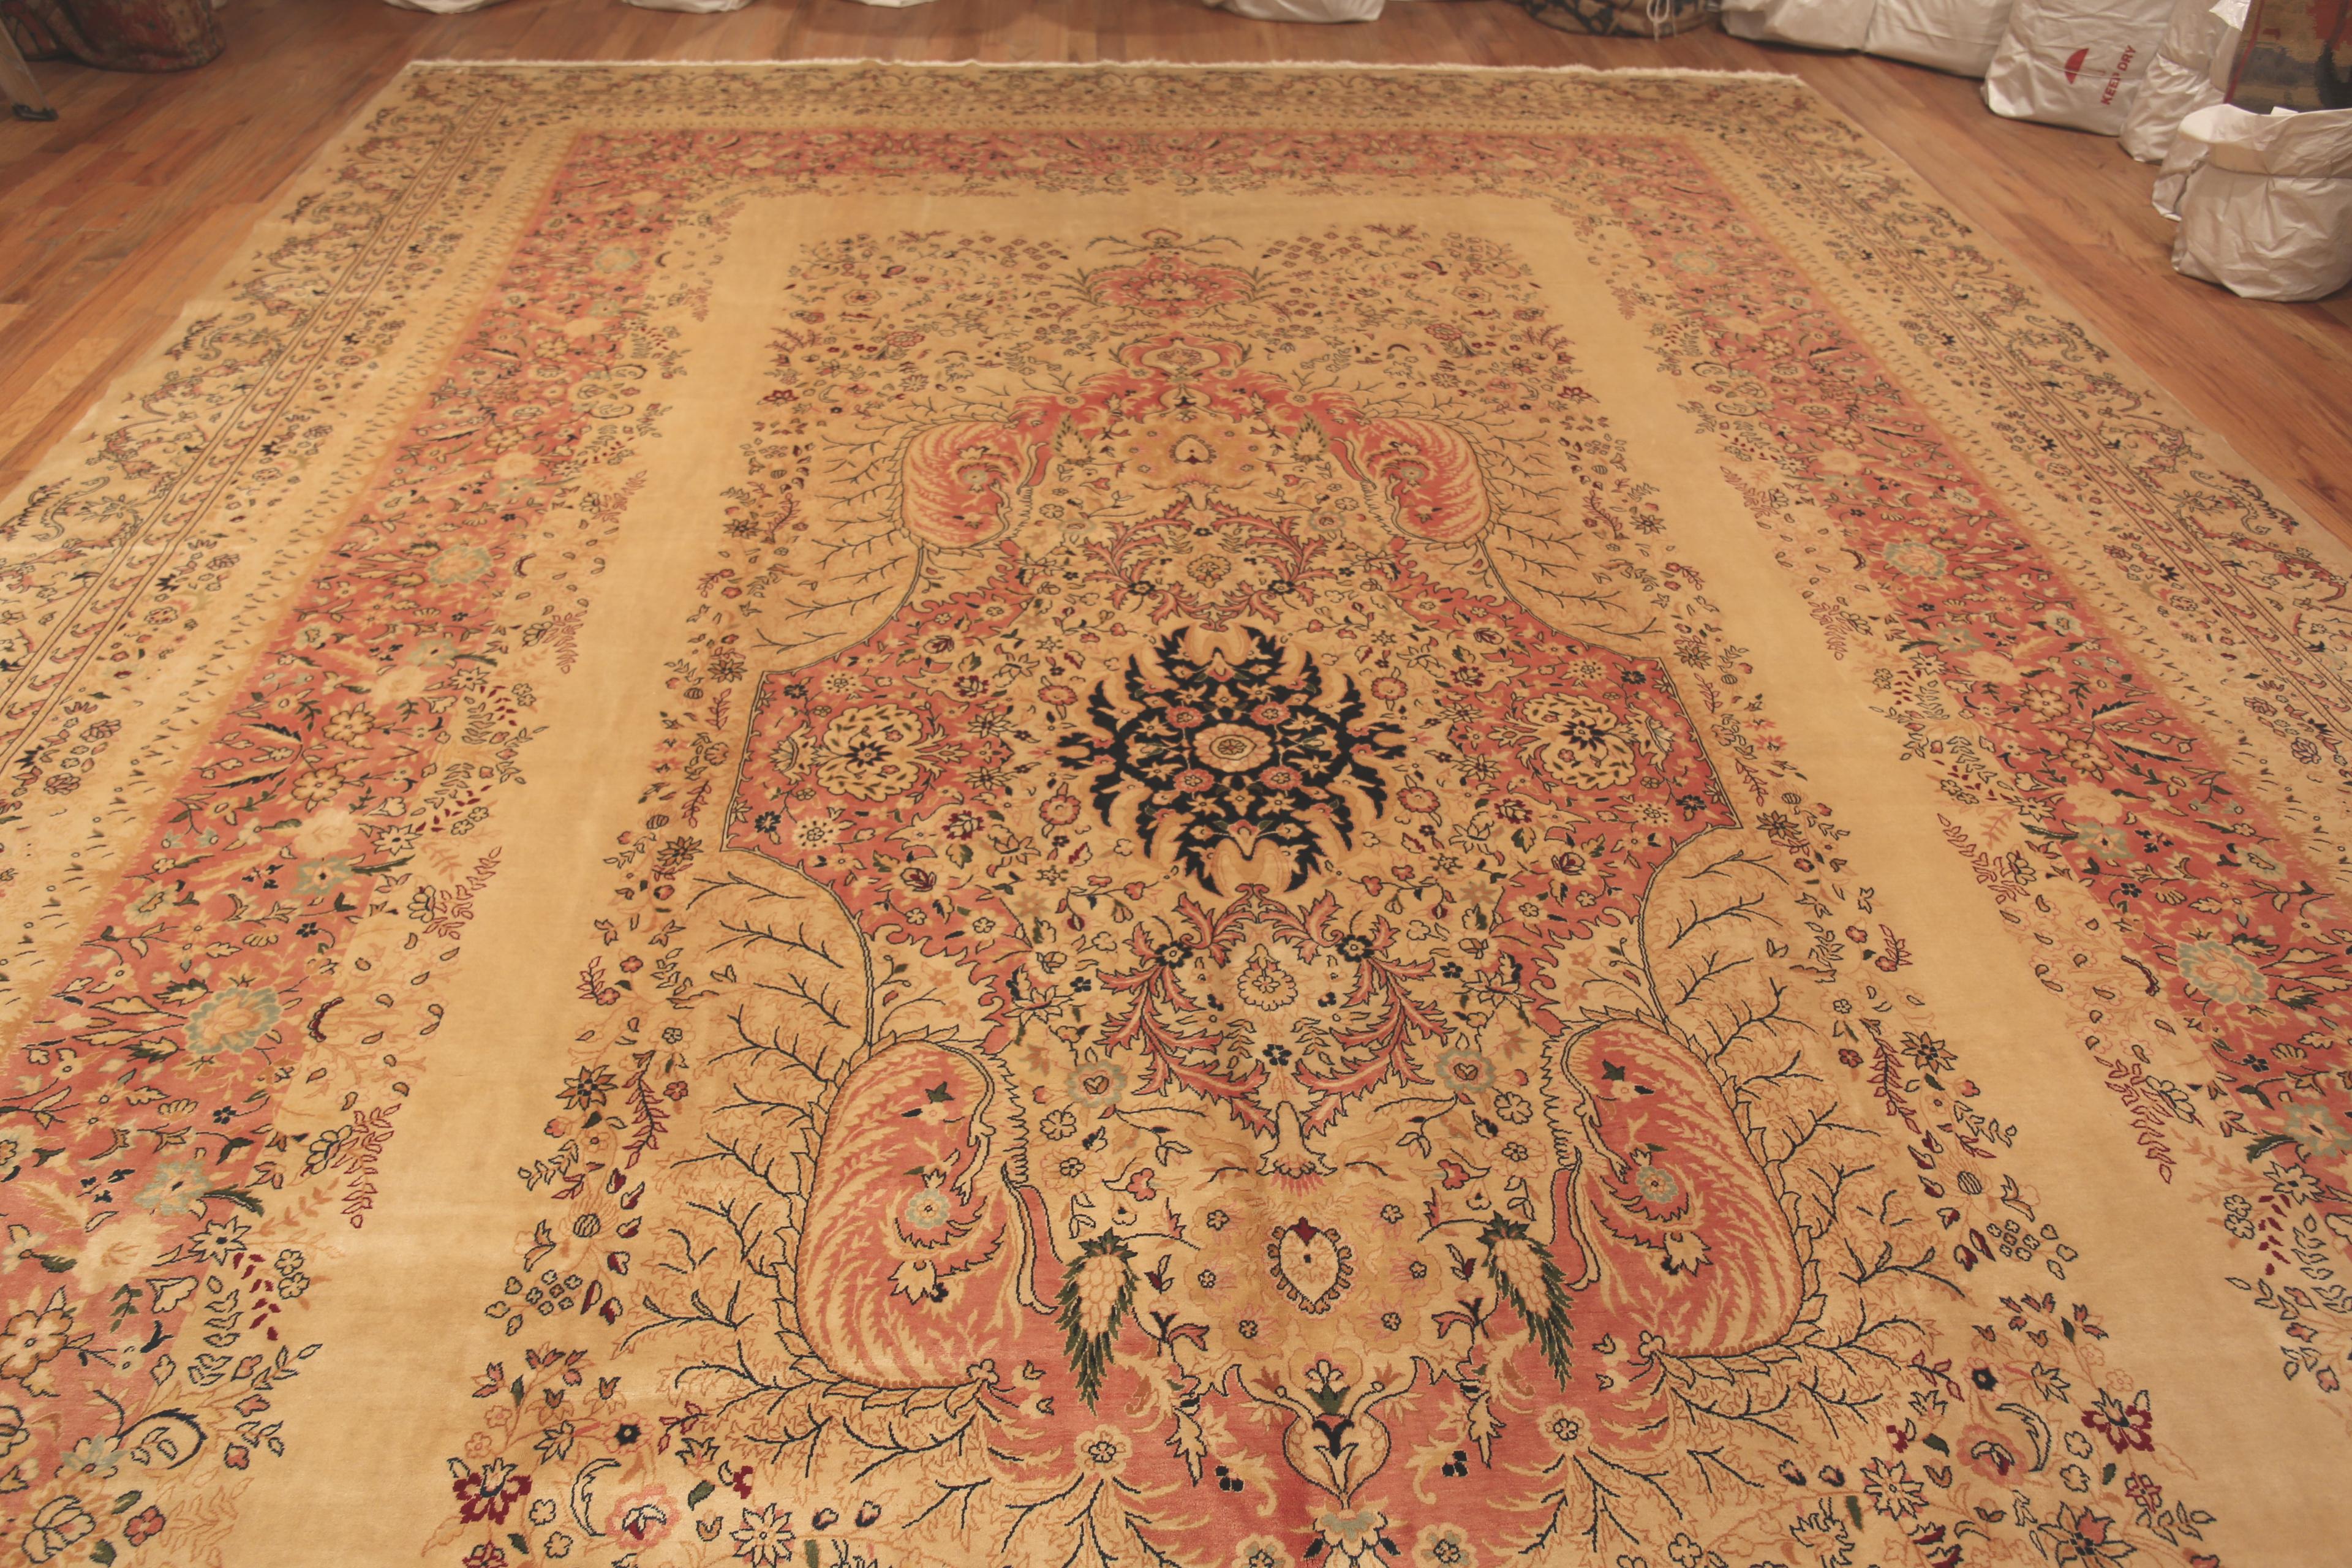 Nazmiyal Collection Large Vintage Persian Kerman Rug, Country of origin / rug type: Persian rug, Circa date: 1950. Size: 13 ft x 19 ft 9 in (3.96 m x 6.02 m)